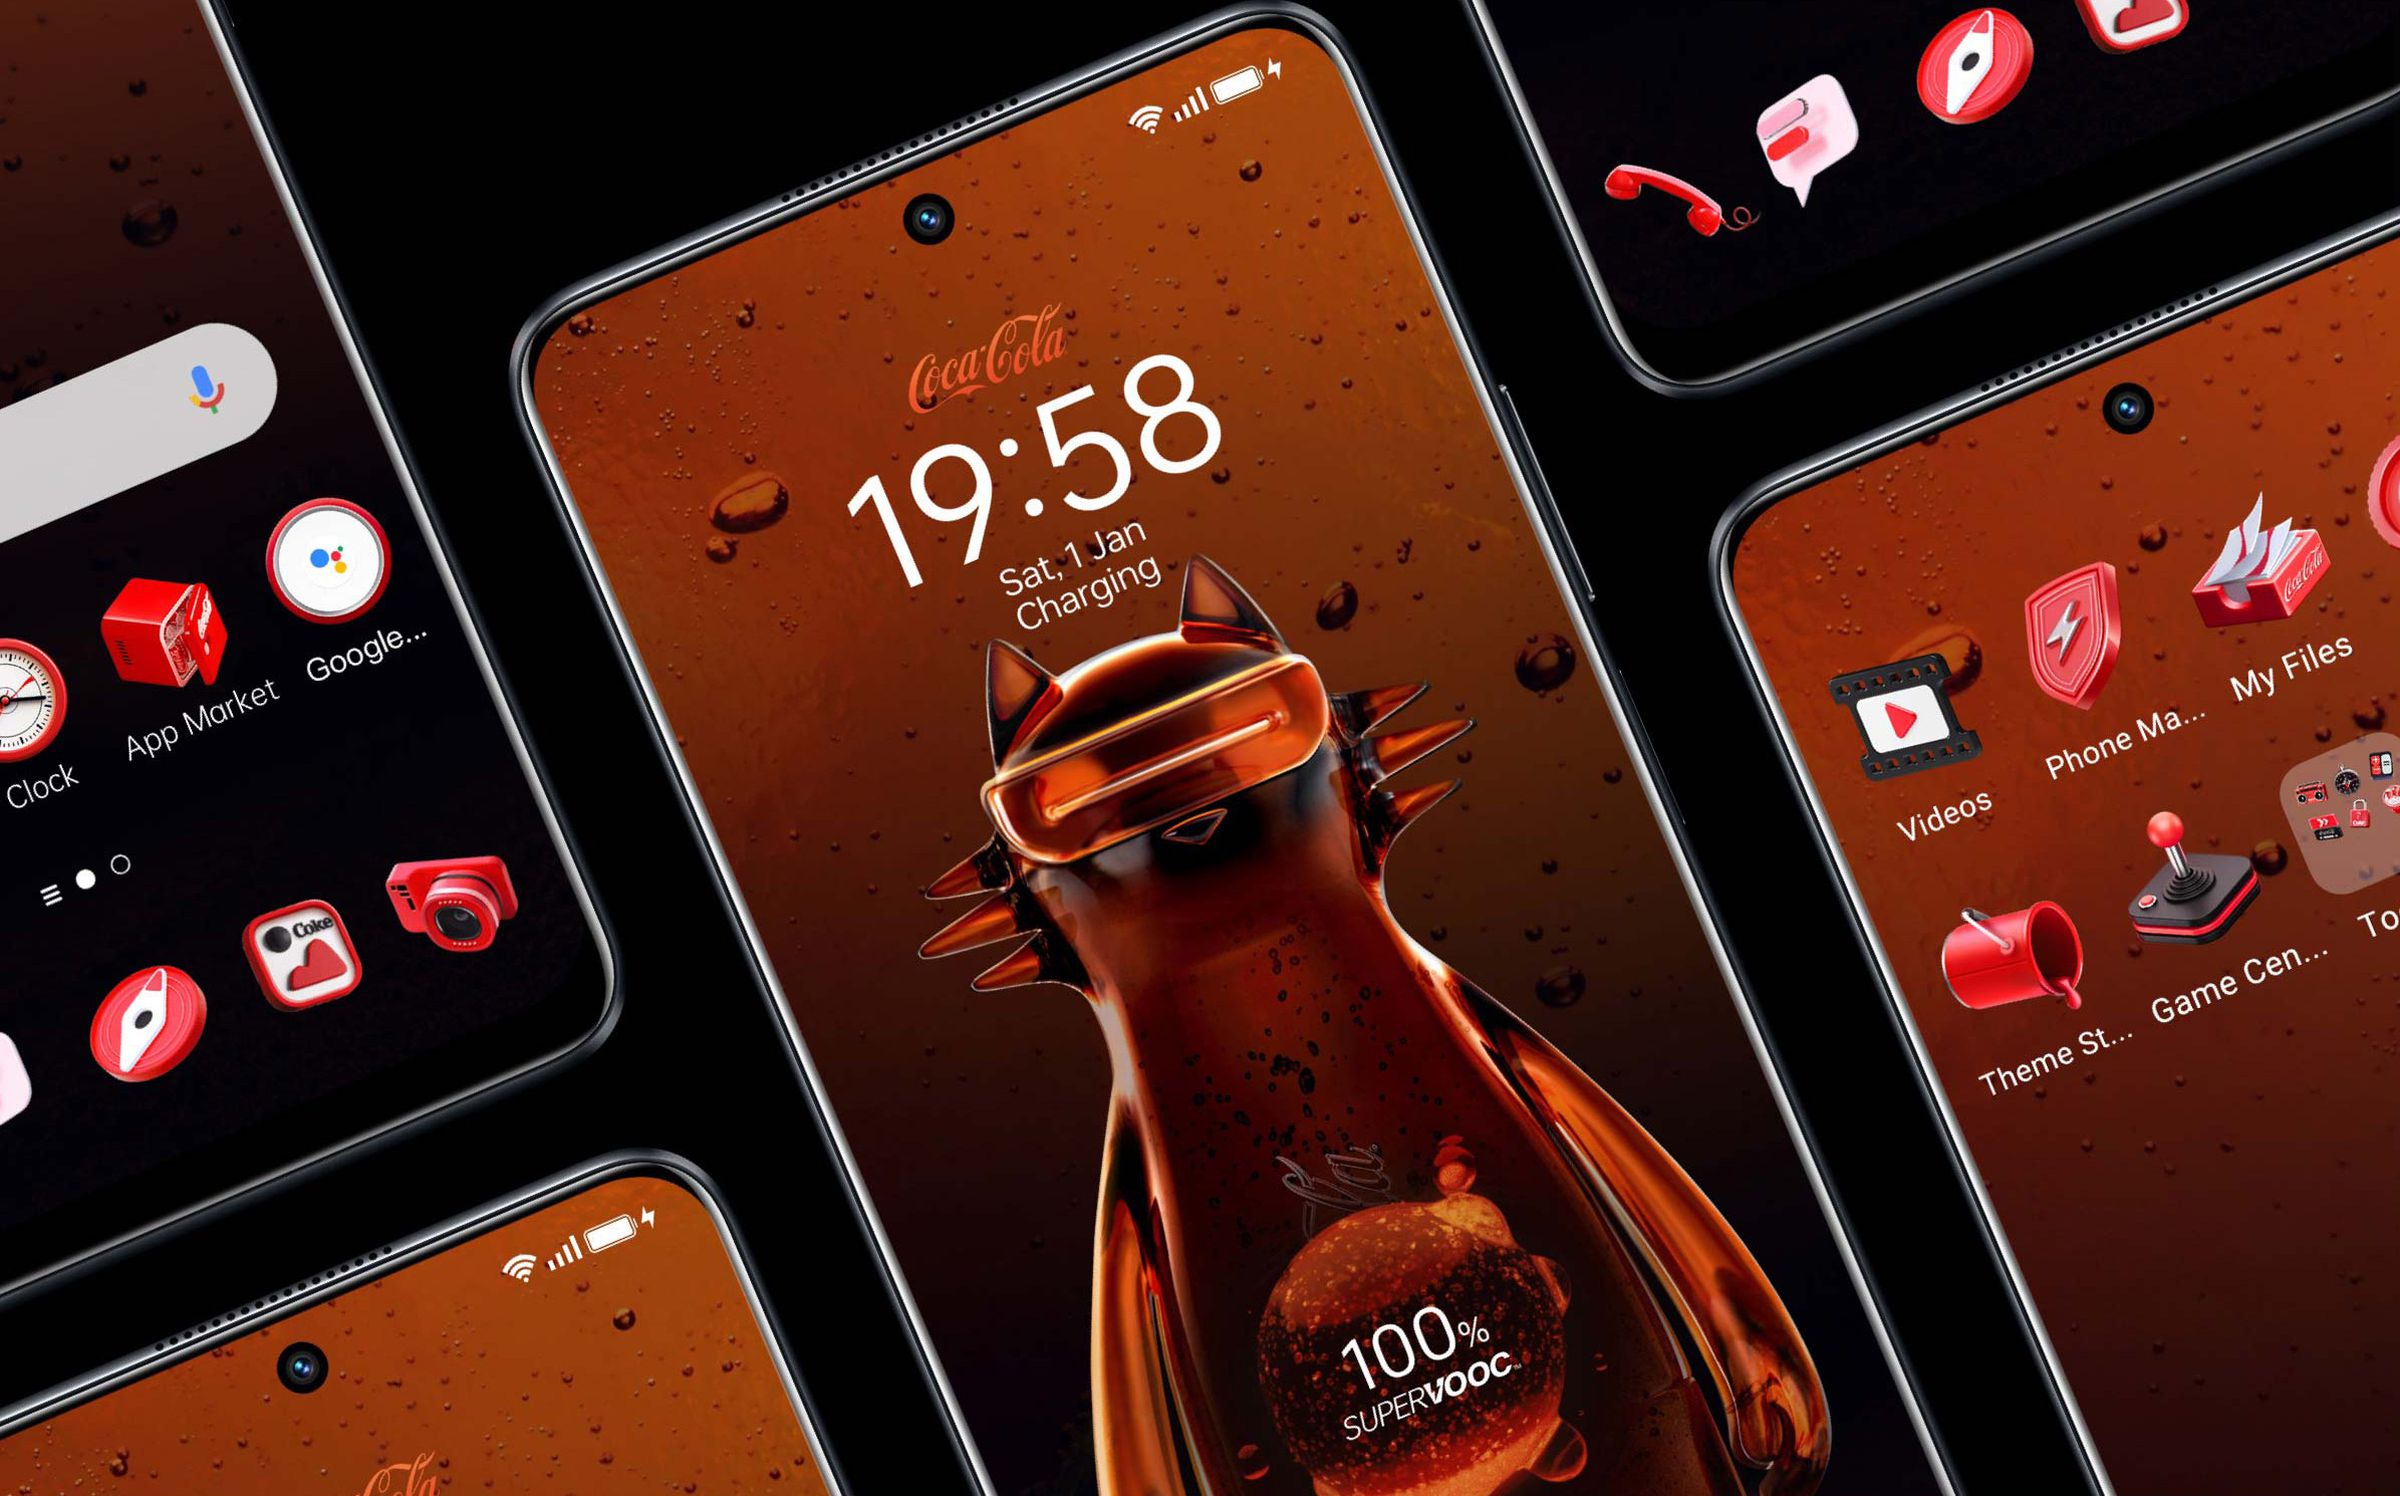 Coca-Cola themed lock screen, app icon and graphics showing loading animation.